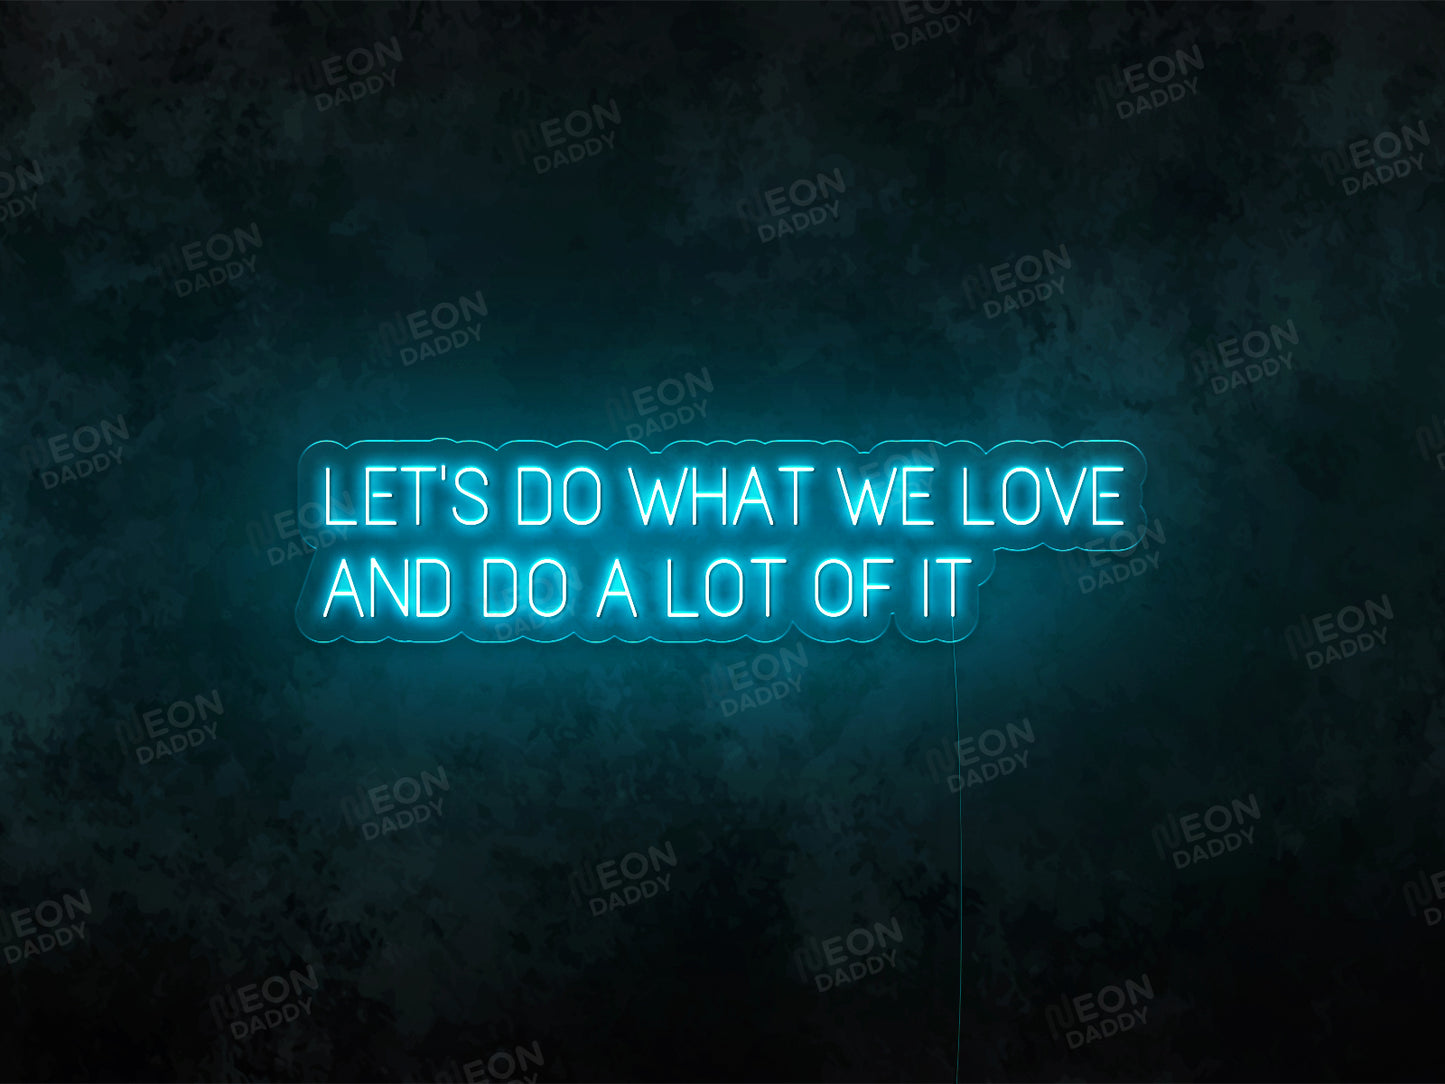 Lets Do What We Love And Do a Lot of It